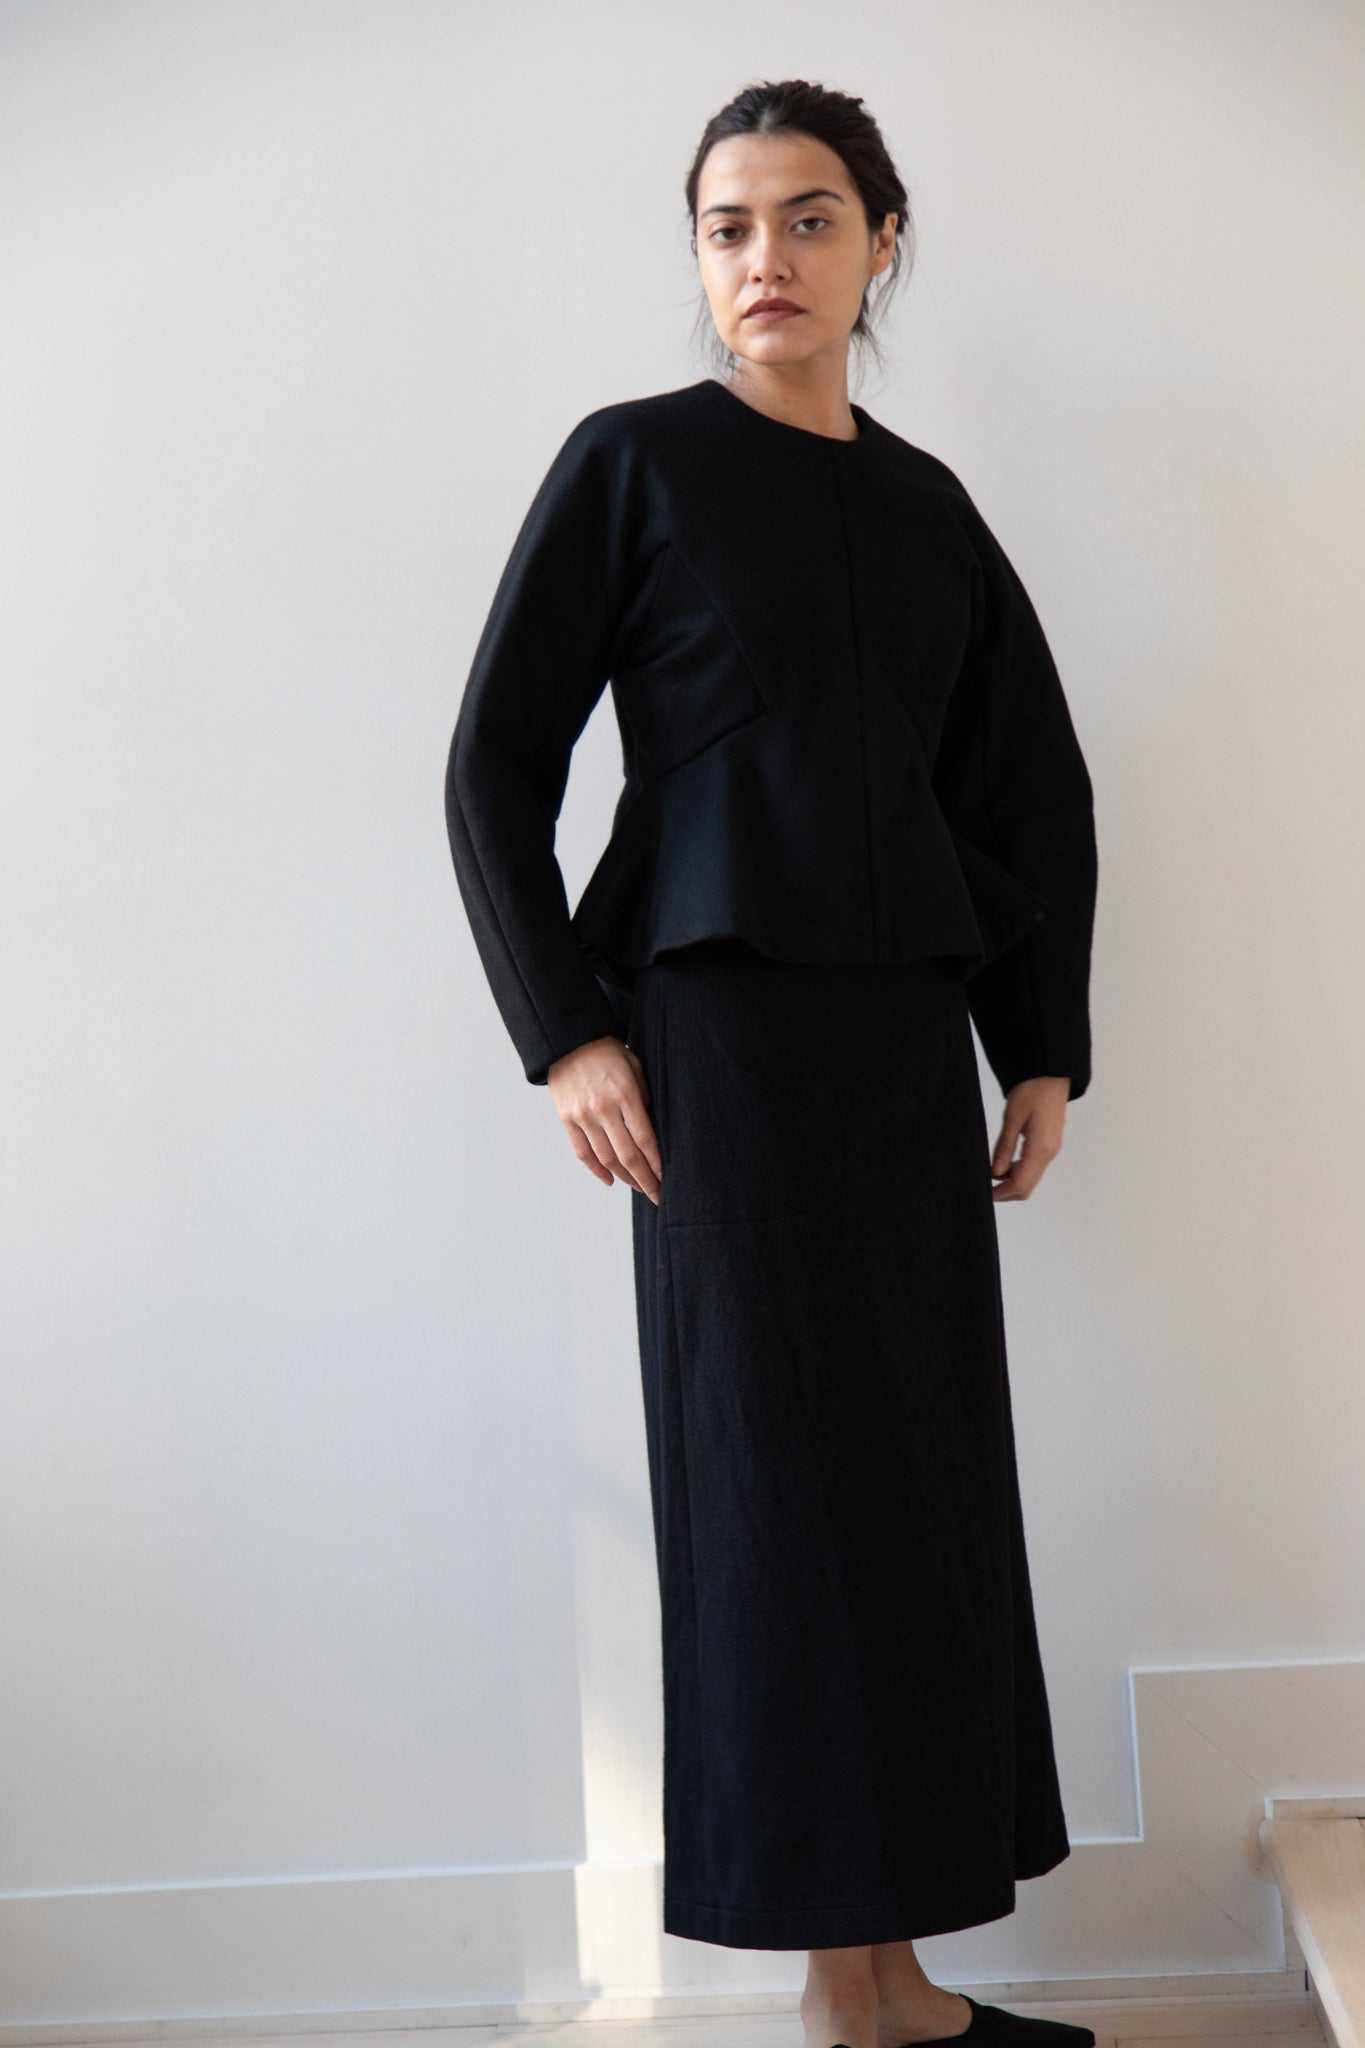 Tenne Handcrafted Modern | Pullover in Black